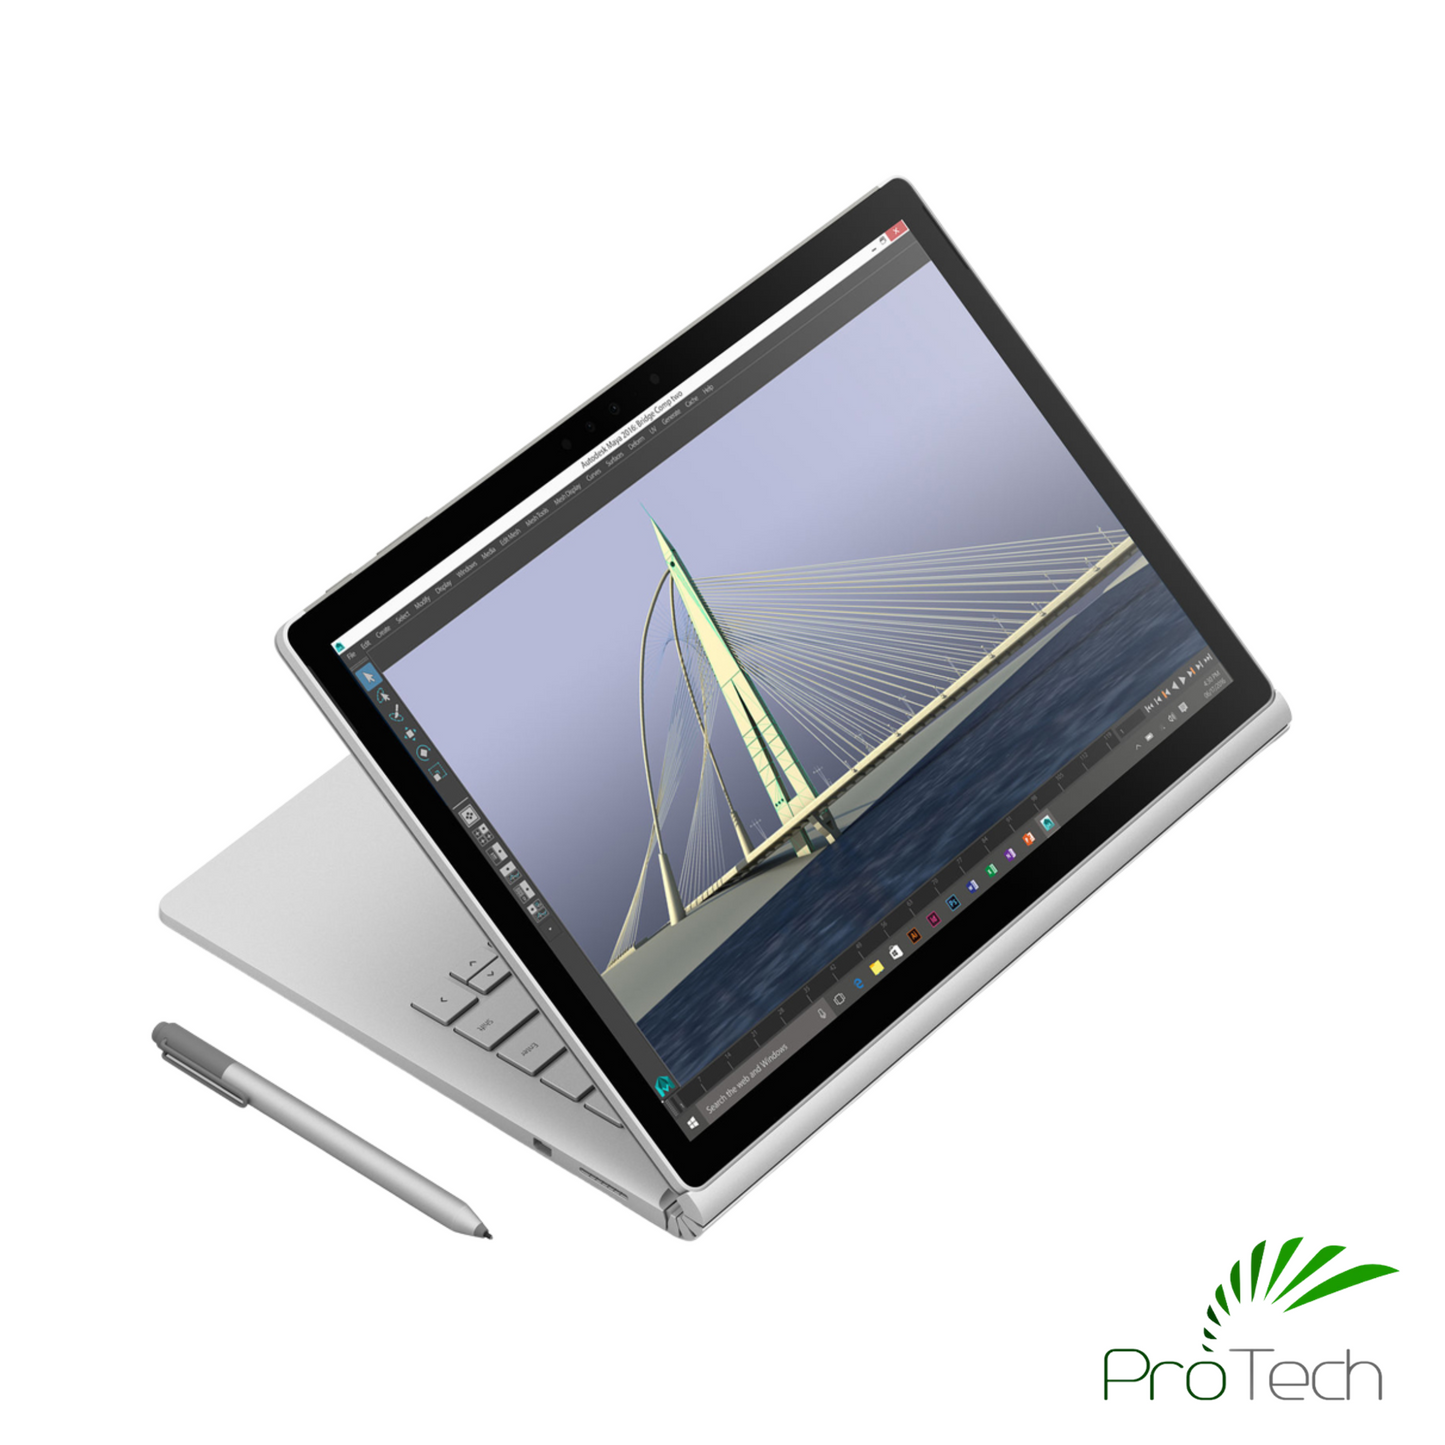 Microsoft Surface Book 2 13" | Core i7 | 8GB RAM | 256GB SSD ProTech I.T. Solutions